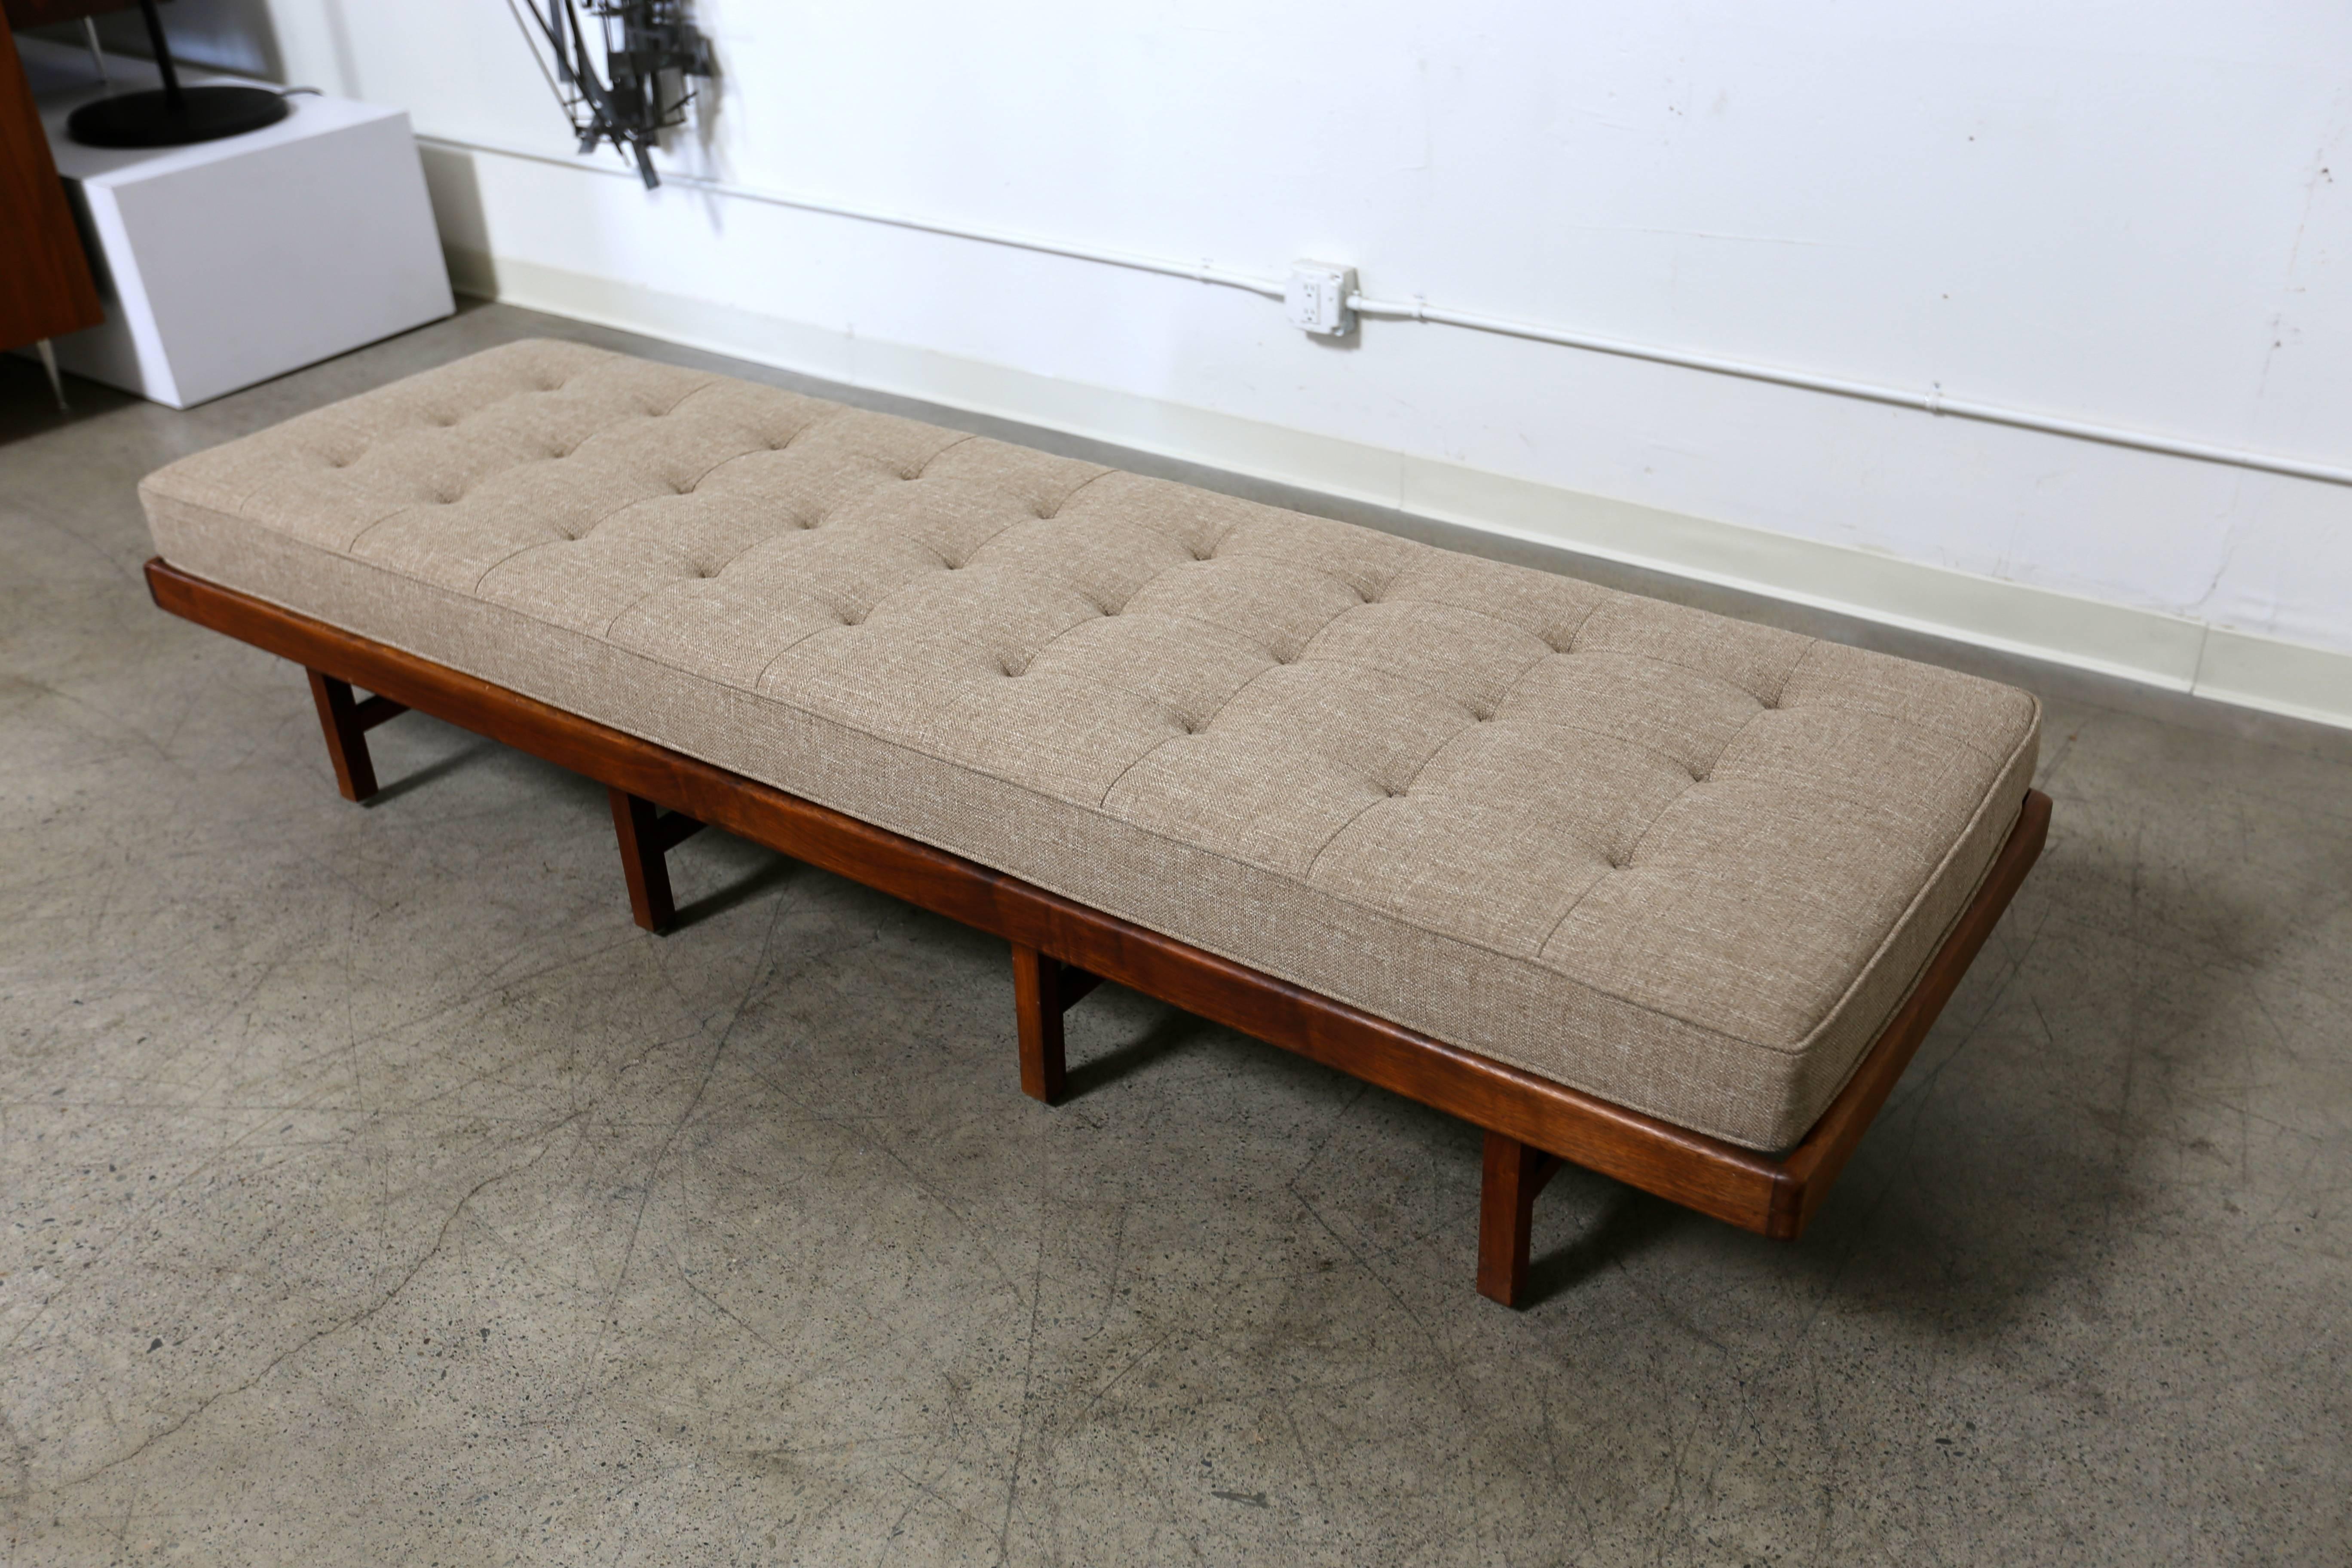 Studio crafted solid walnut bench with a tweed cushion.